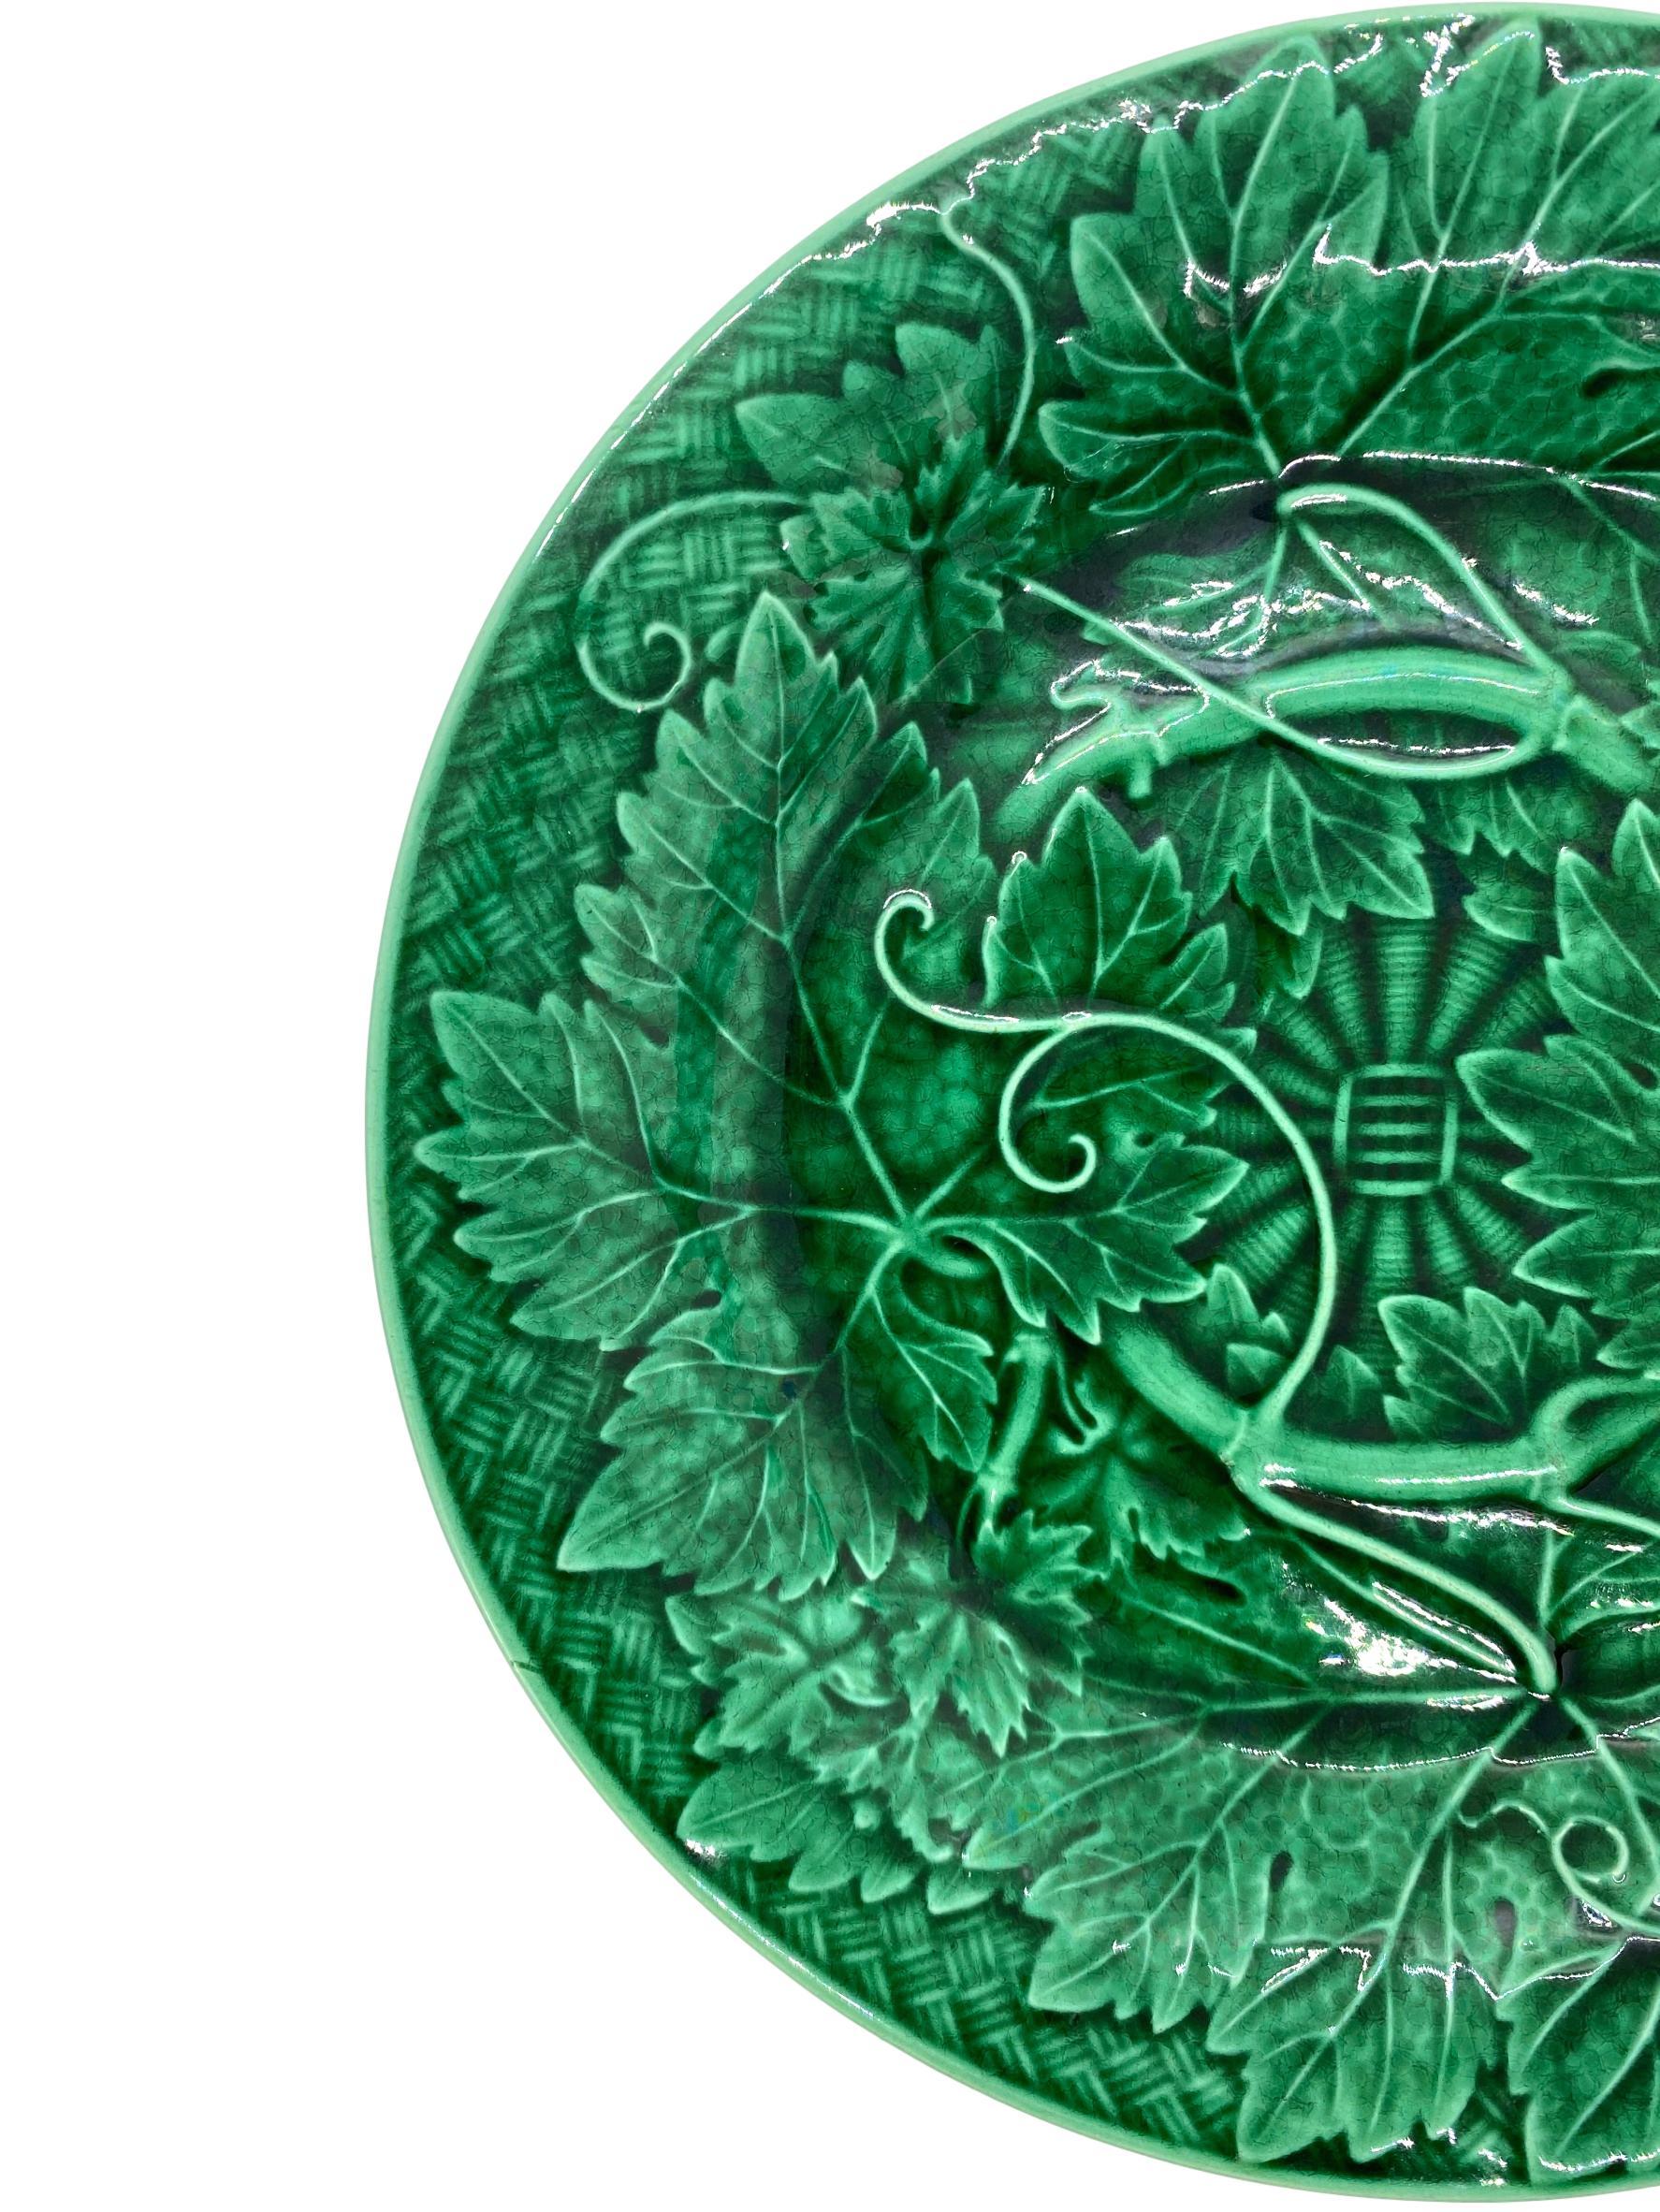 Wedgwood Majolica green glazed plate, with relief-molded grape leaves and vines, raised on a basketweave ground, the reverse with impressed mark 'WEDGWOOD' and date letter 'O' for 1885.

For 30 years we have been among the world's preeminent